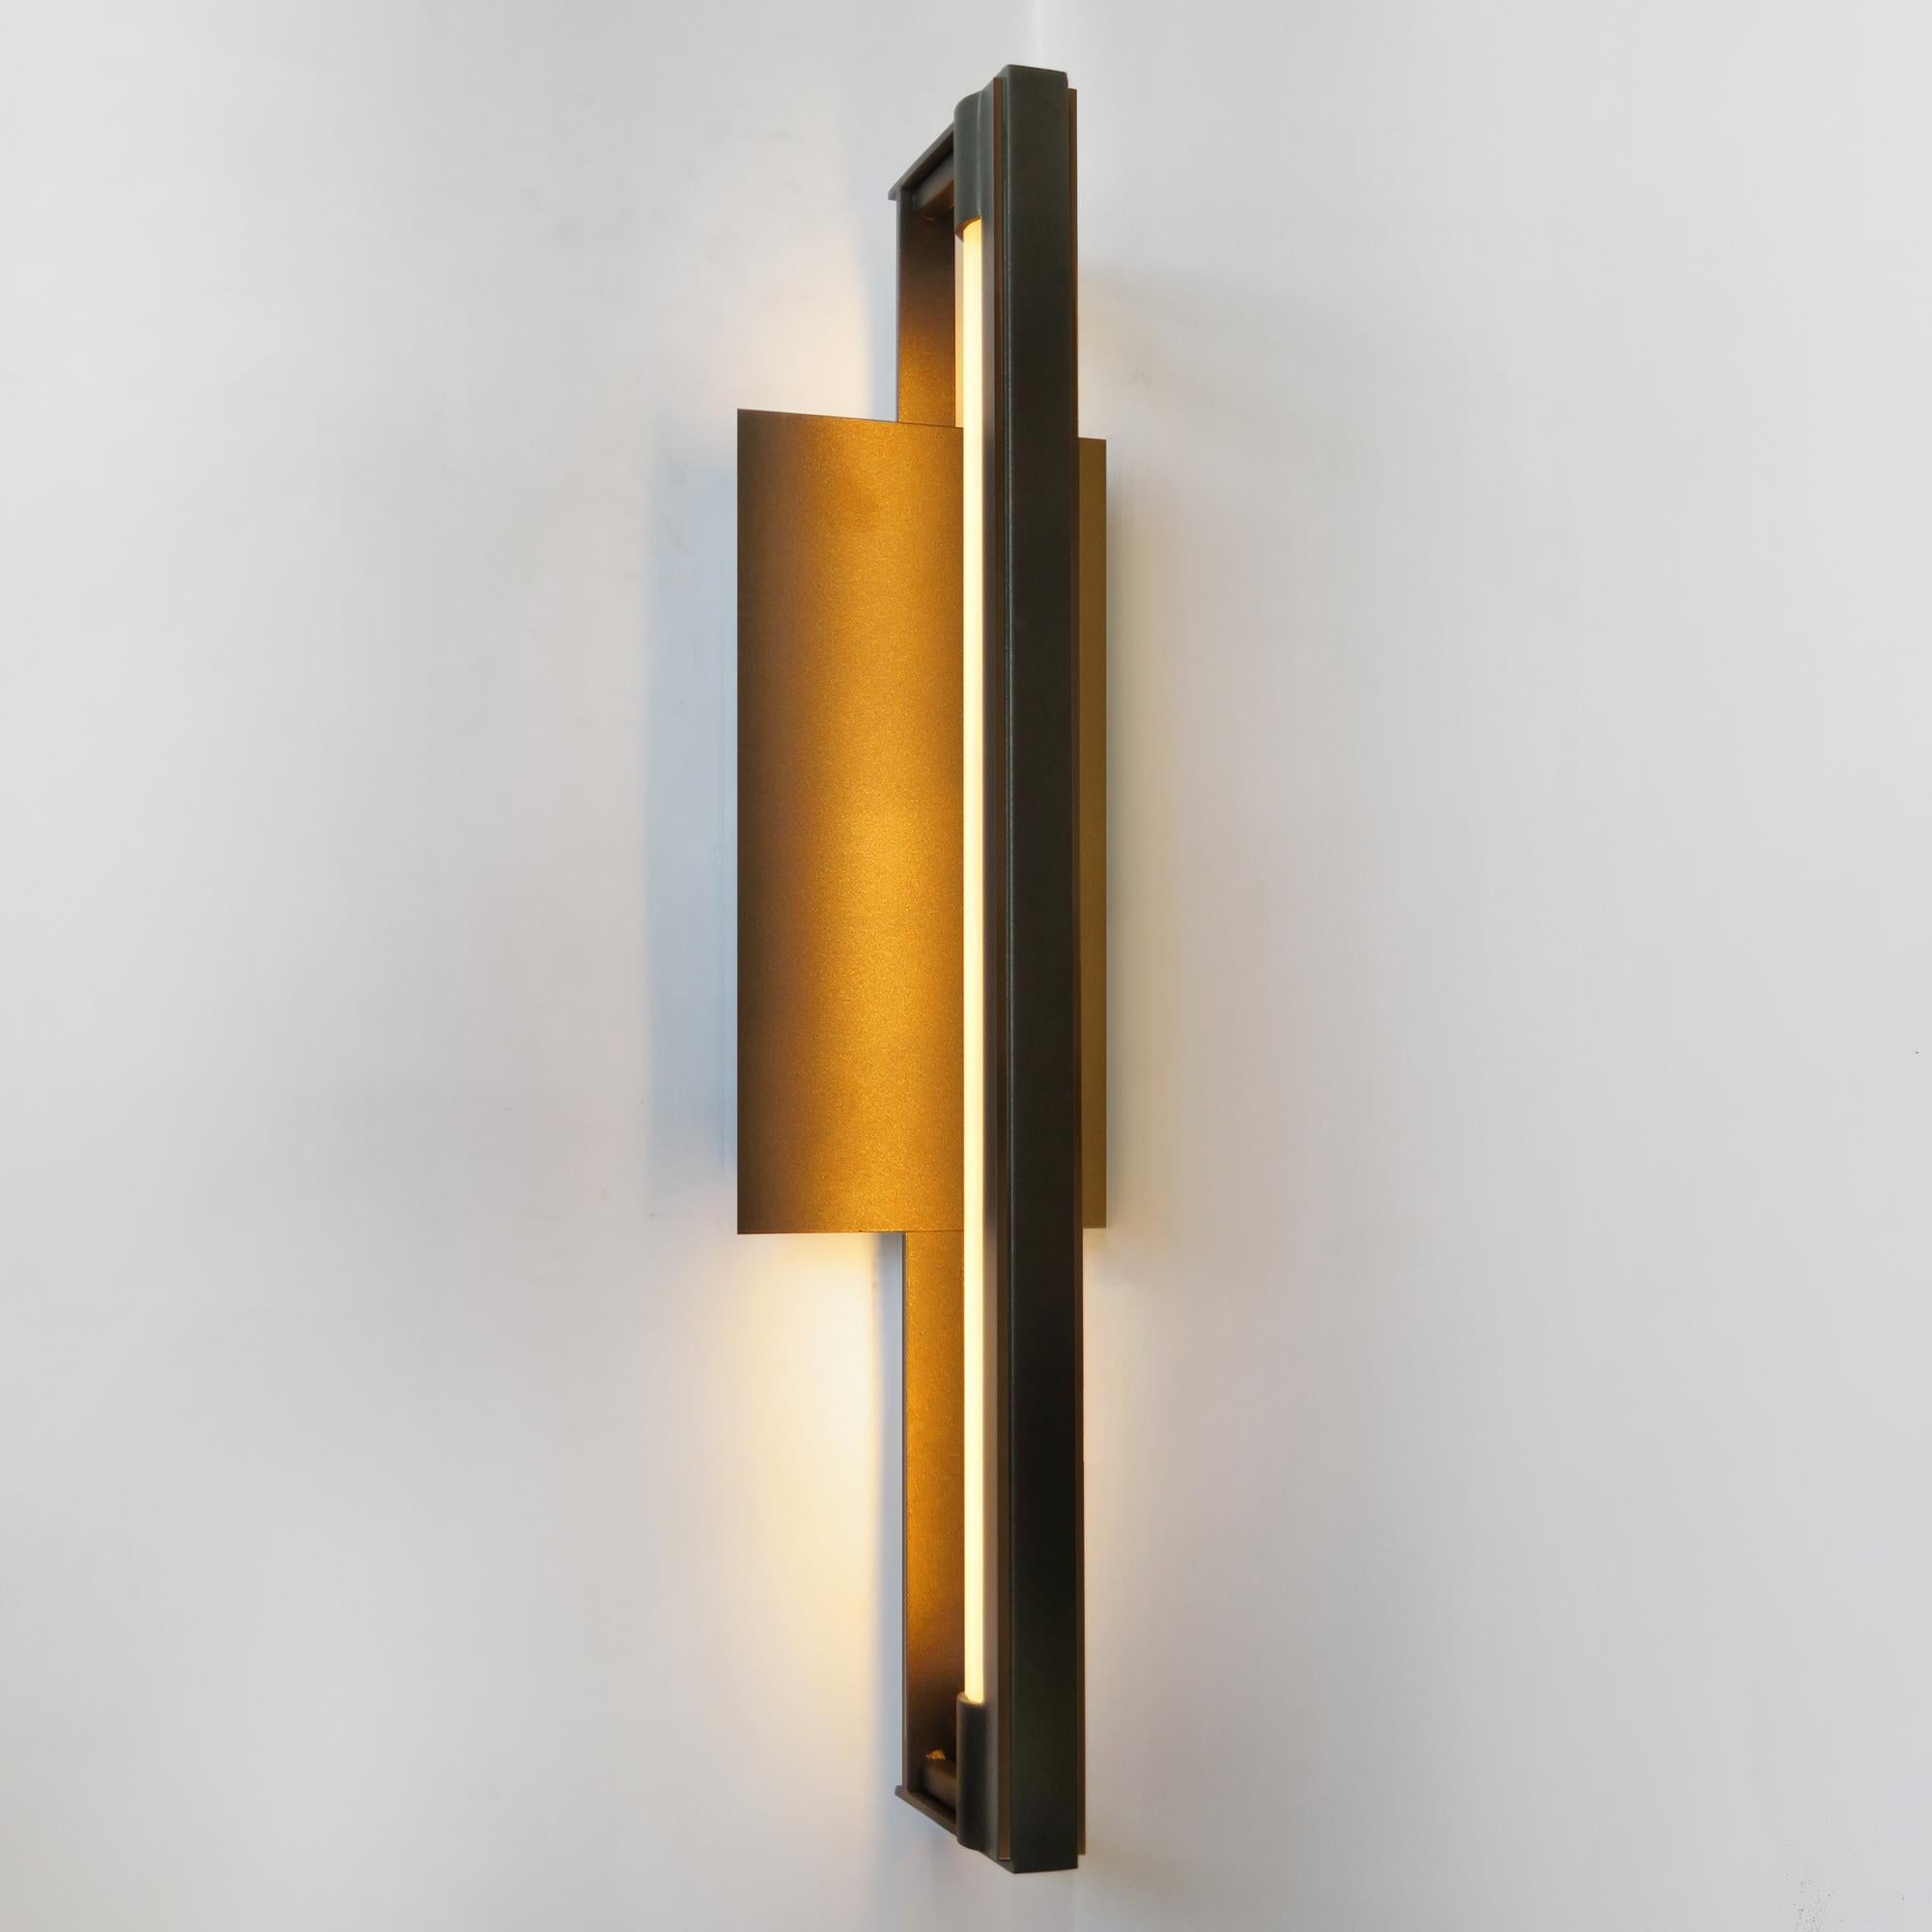 The RAY Wall Sconce is built from cold rolled steel, and is diffused by a minimal frosted, round acrylic rod. The fixture is back-lit with warm white LED strip and makes a beautiful addition to dining rooms, entryways, bathroom vanities, and master